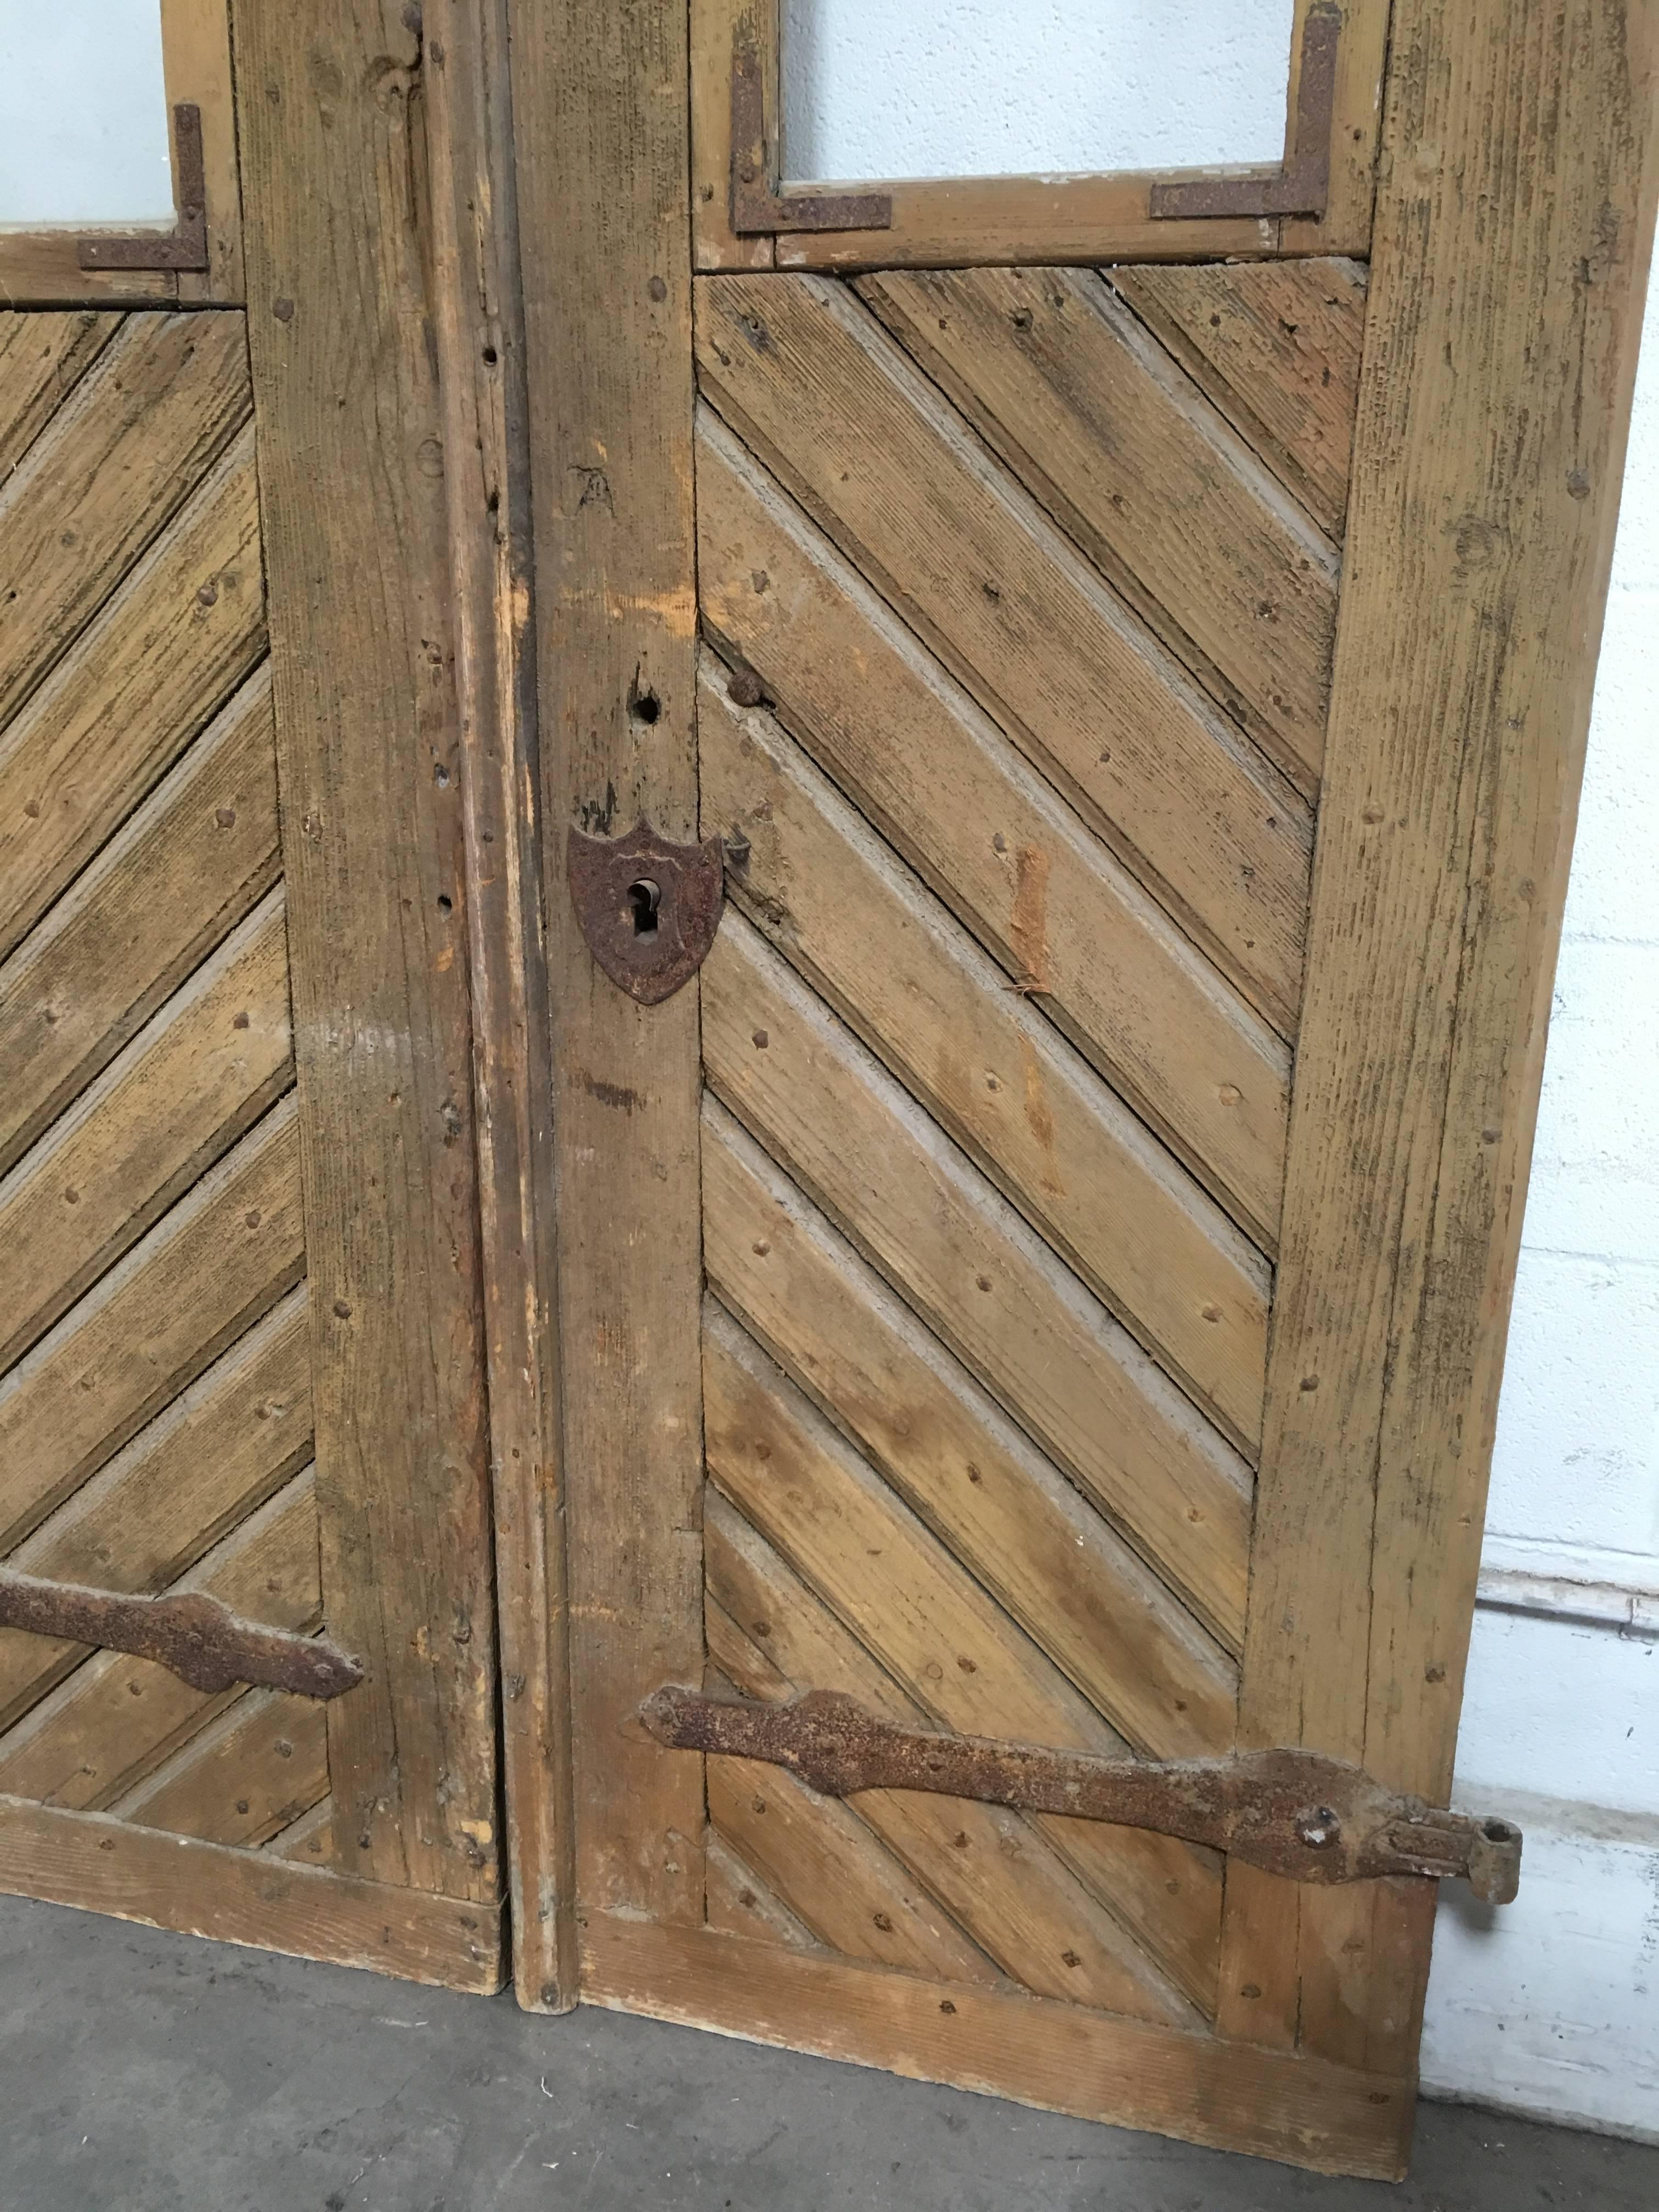 Beautiful wooden doors with iron hardware, wonderfully preserved. No key, but all working latches and parts.

Measurement listed is for both doors latched together, left door 24